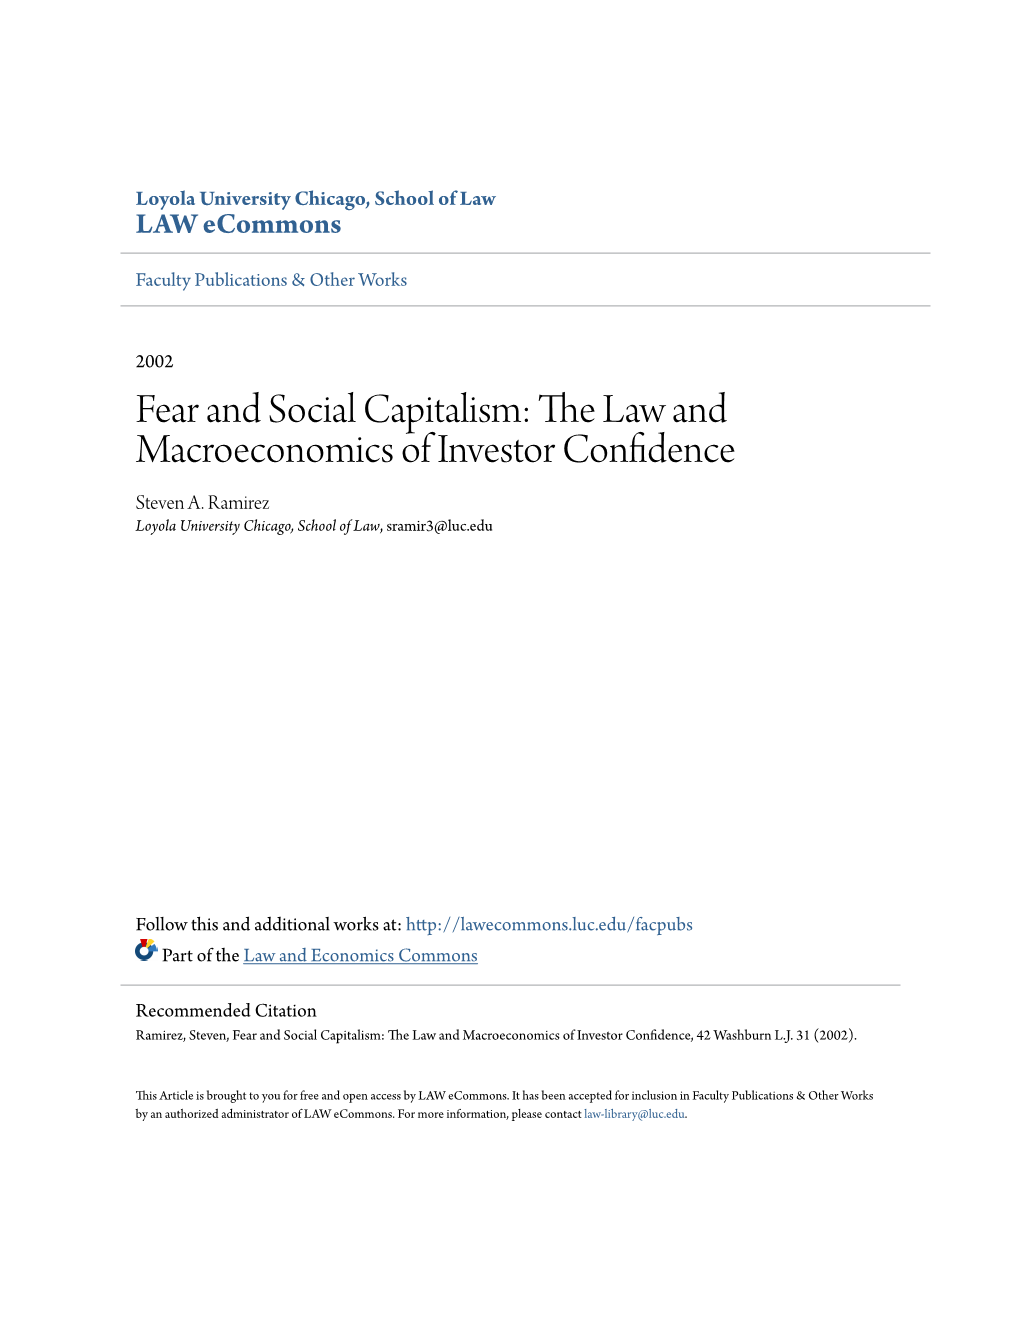 Fear and Social Capitalism: the Law and Macroeconomics of Investor Confidence Steven A